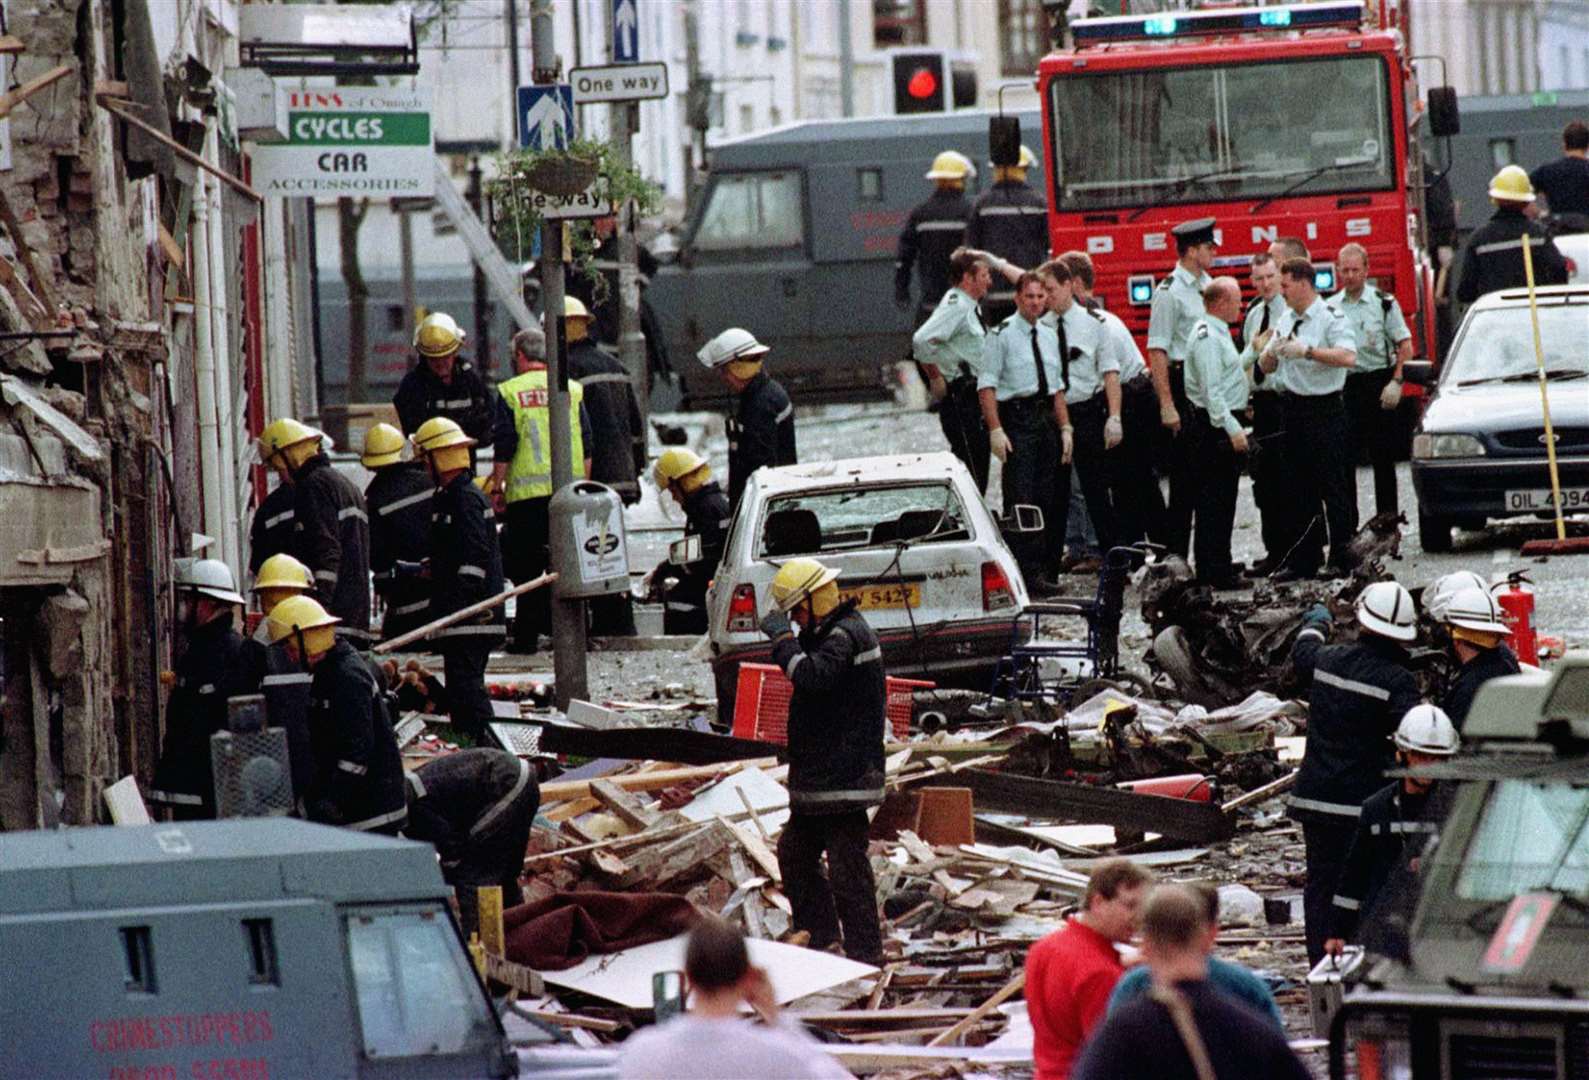 Police officers and firefighters inspect the damage caused by a bomb explosion in Market Street, Omagh (Paul McErlane/PA)